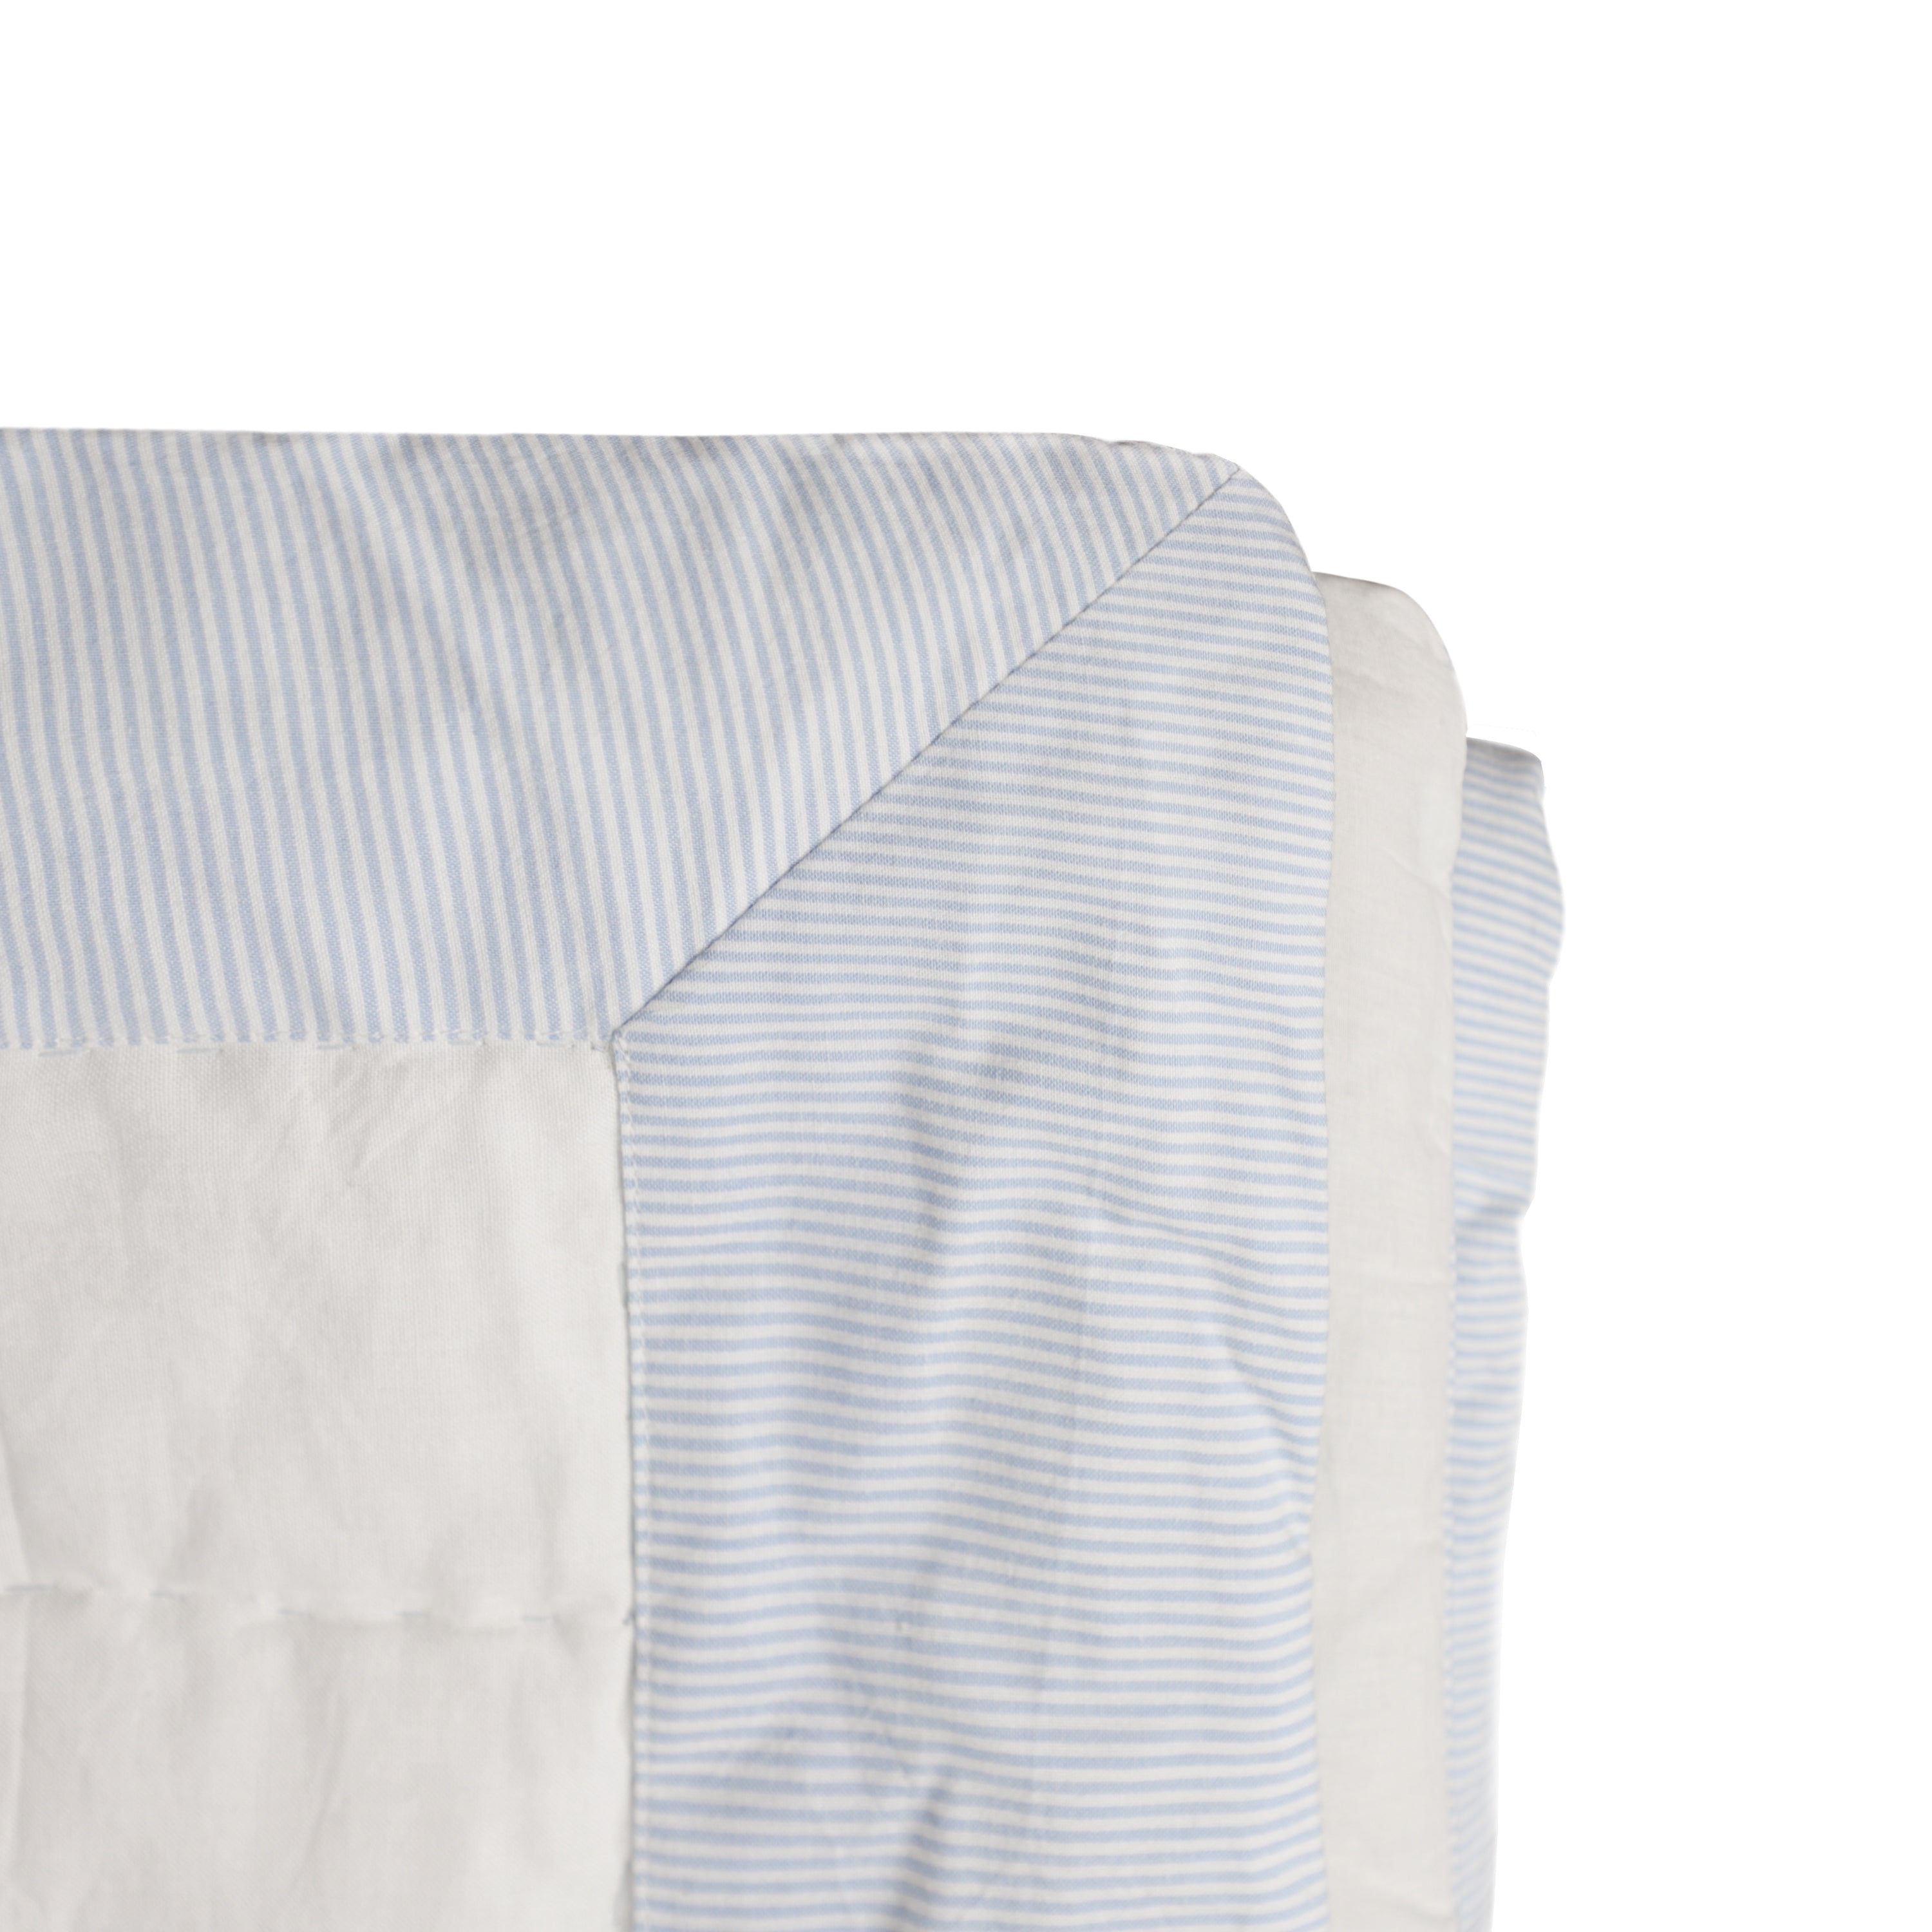 Cotton quilt finished with metered striped edge. Add a designer look to your bedroom with this quilt. 